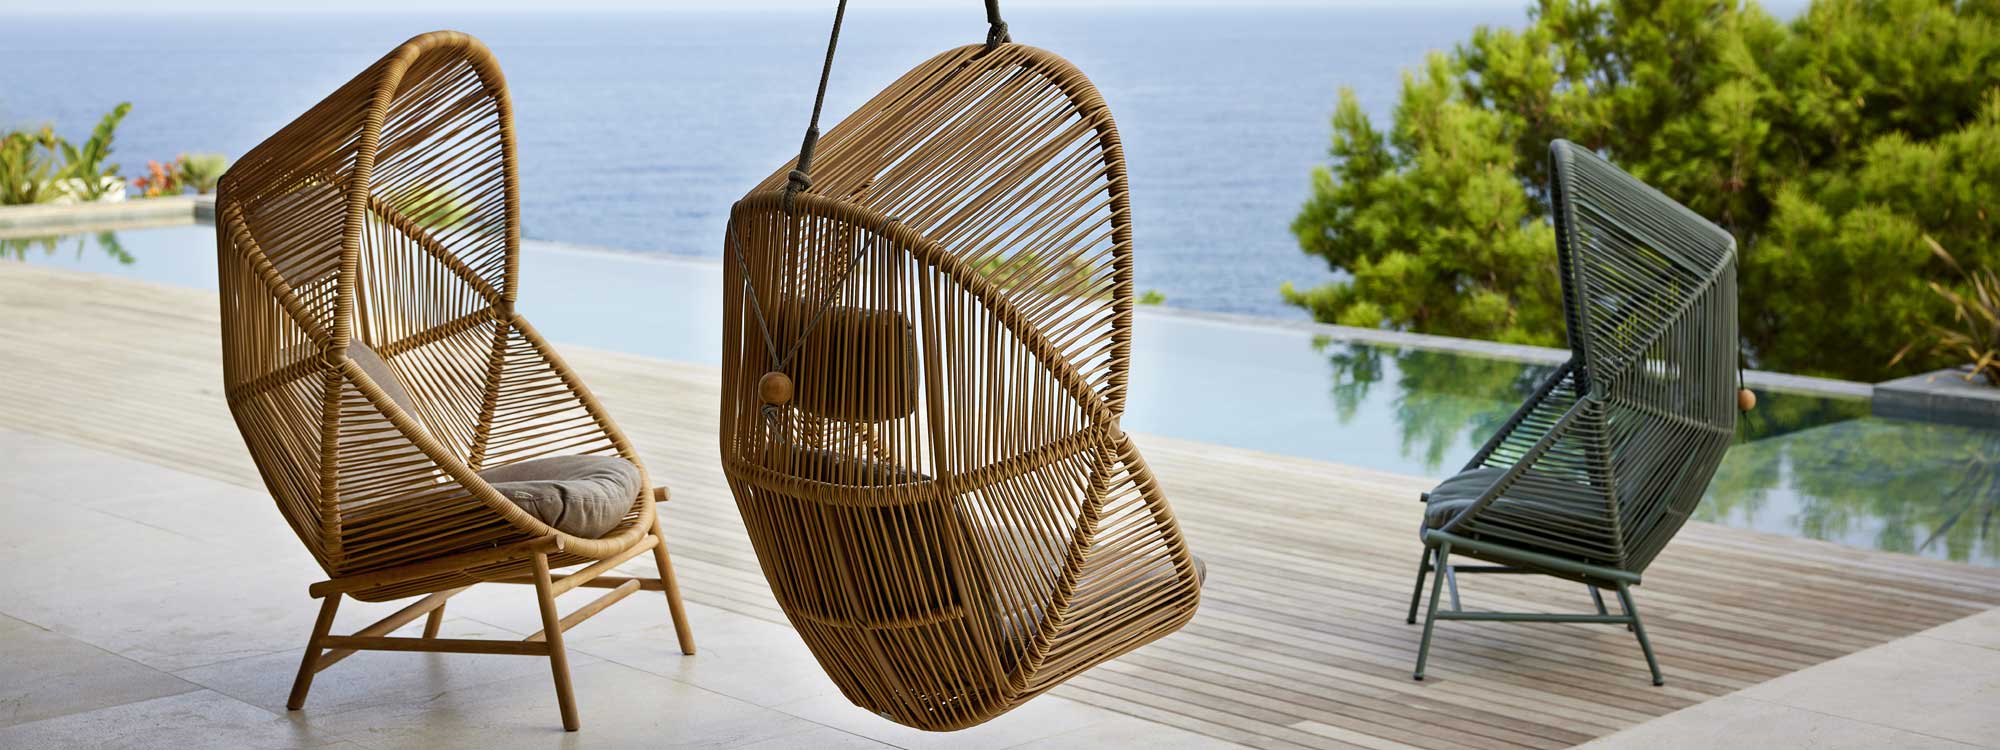 Image of Cane-line Hive high-backed lounge chairs in Cane-line Weave together with Hive hanging garden chair